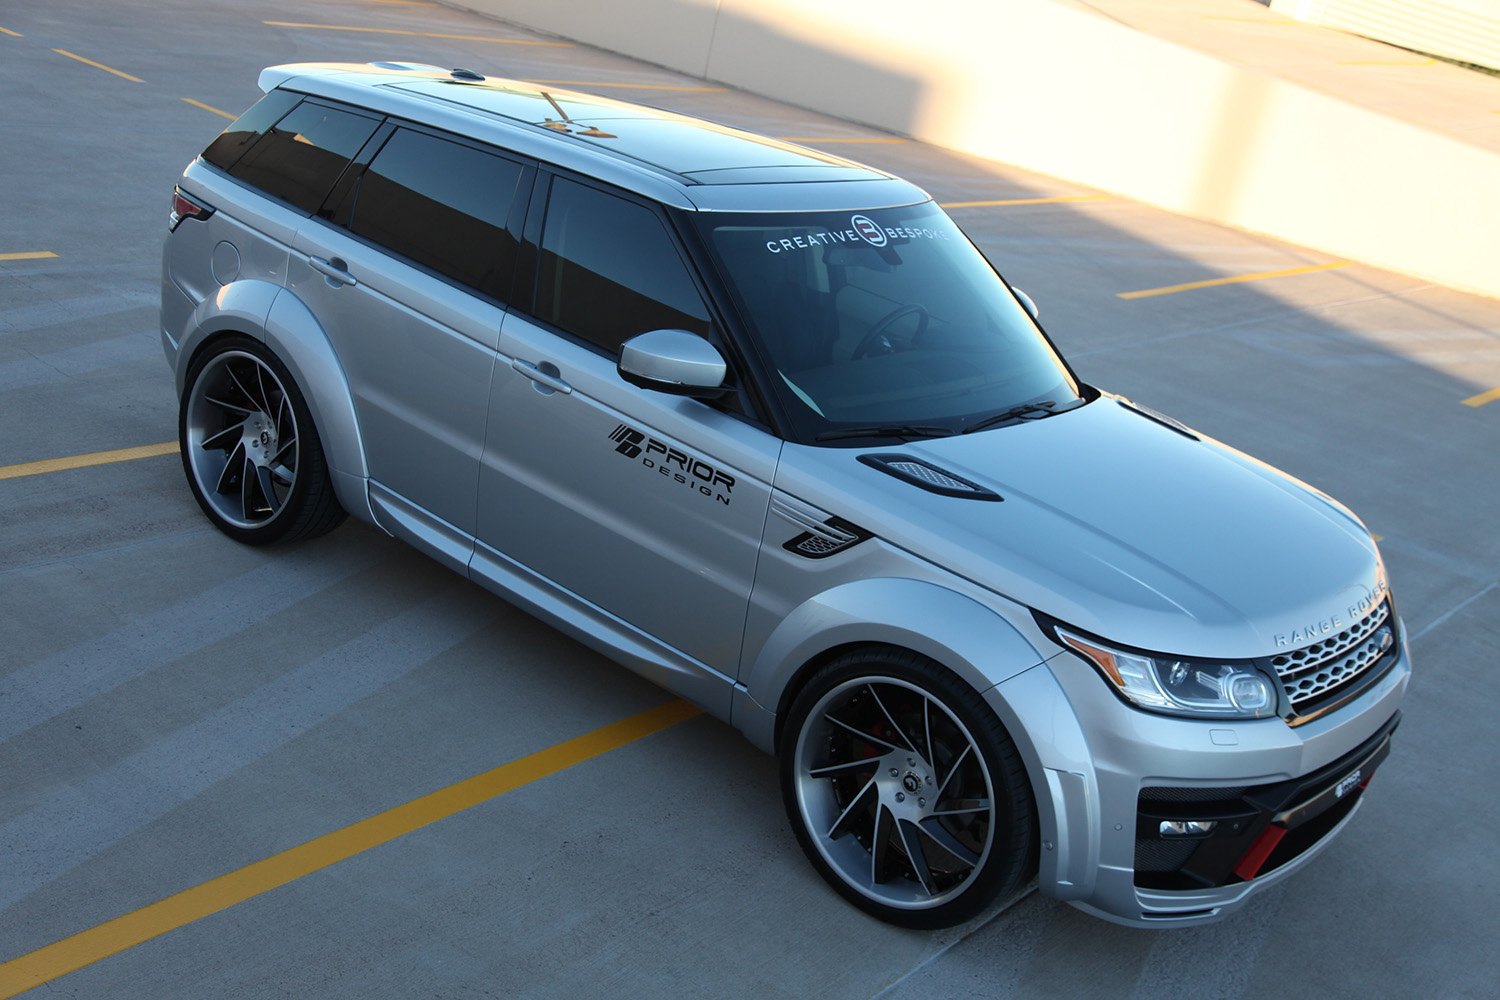 Silver Range Rover Sport with Aftermarket Vented Hood - Photo by Forgiato